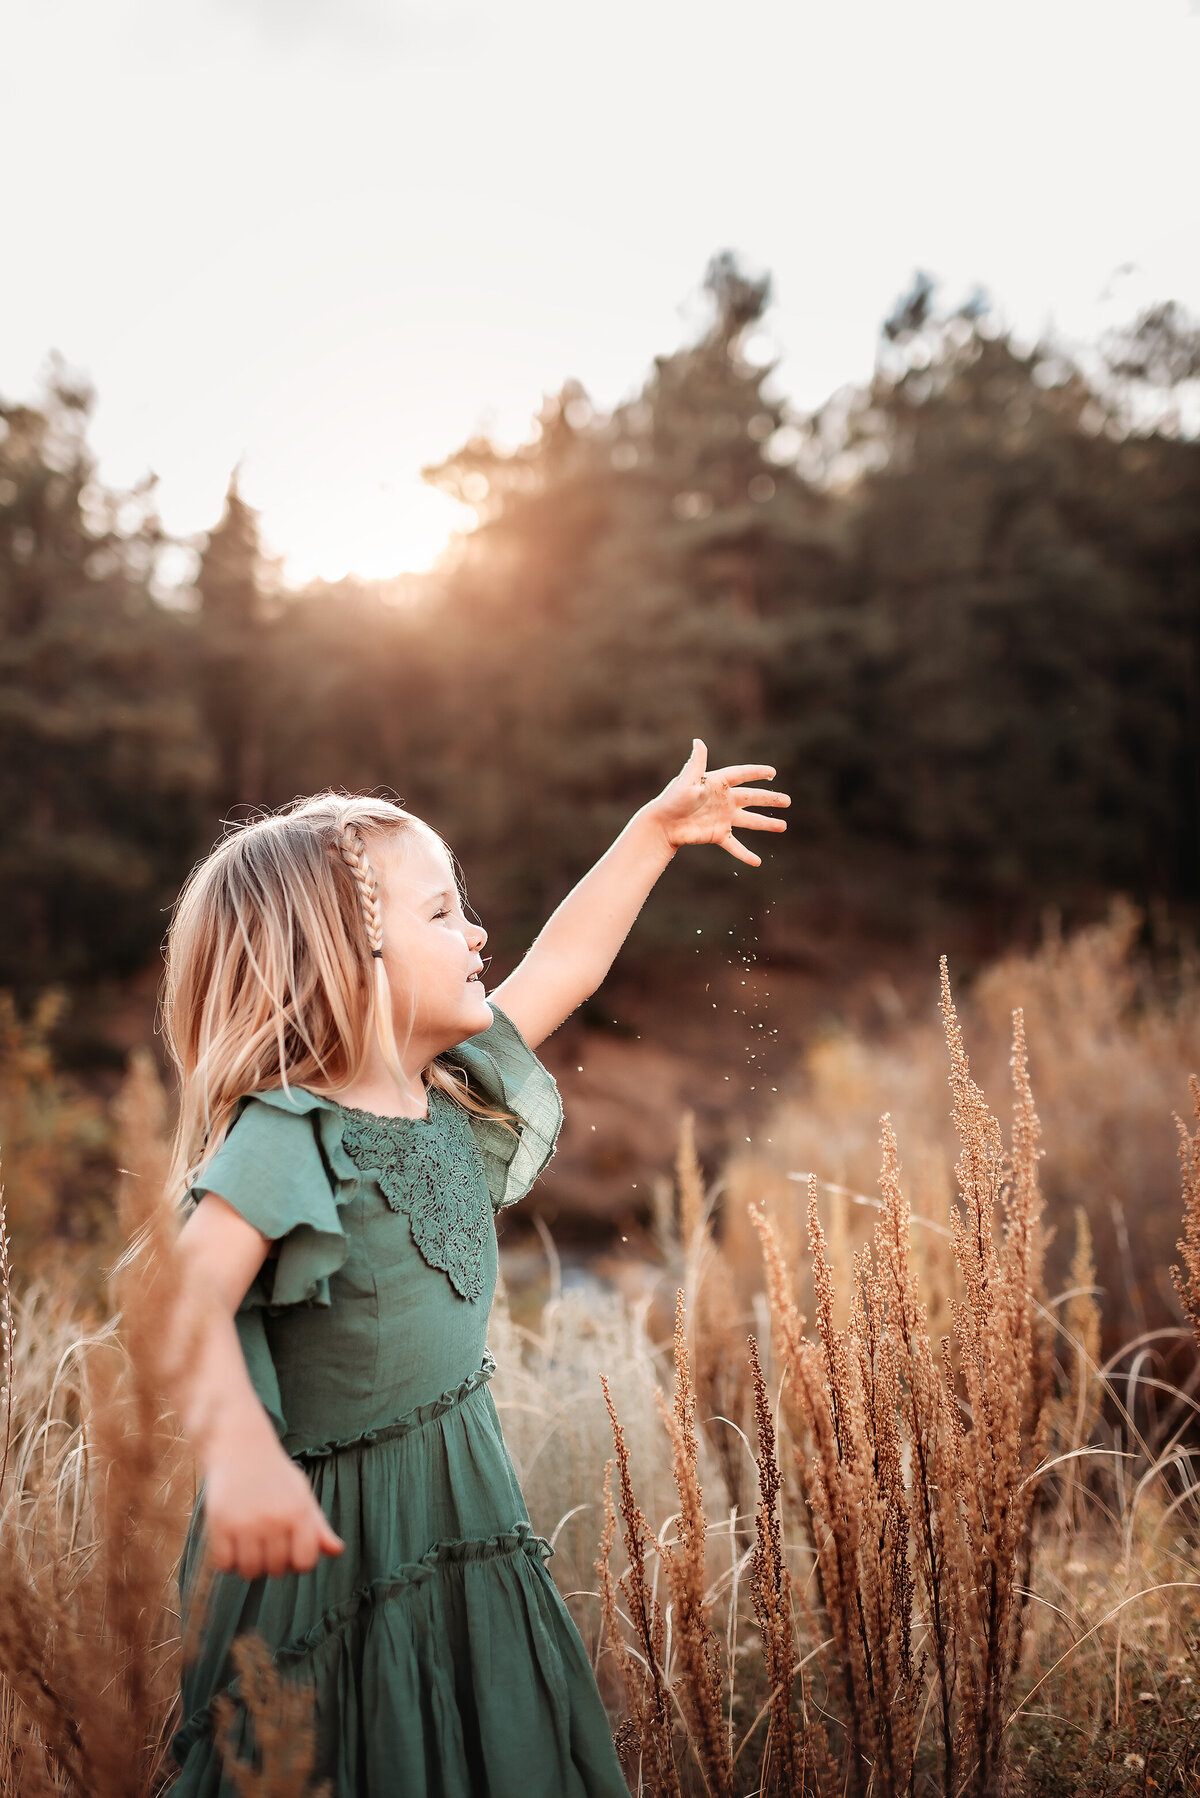 girl sprinkling grass seeds into the air in the sunlight